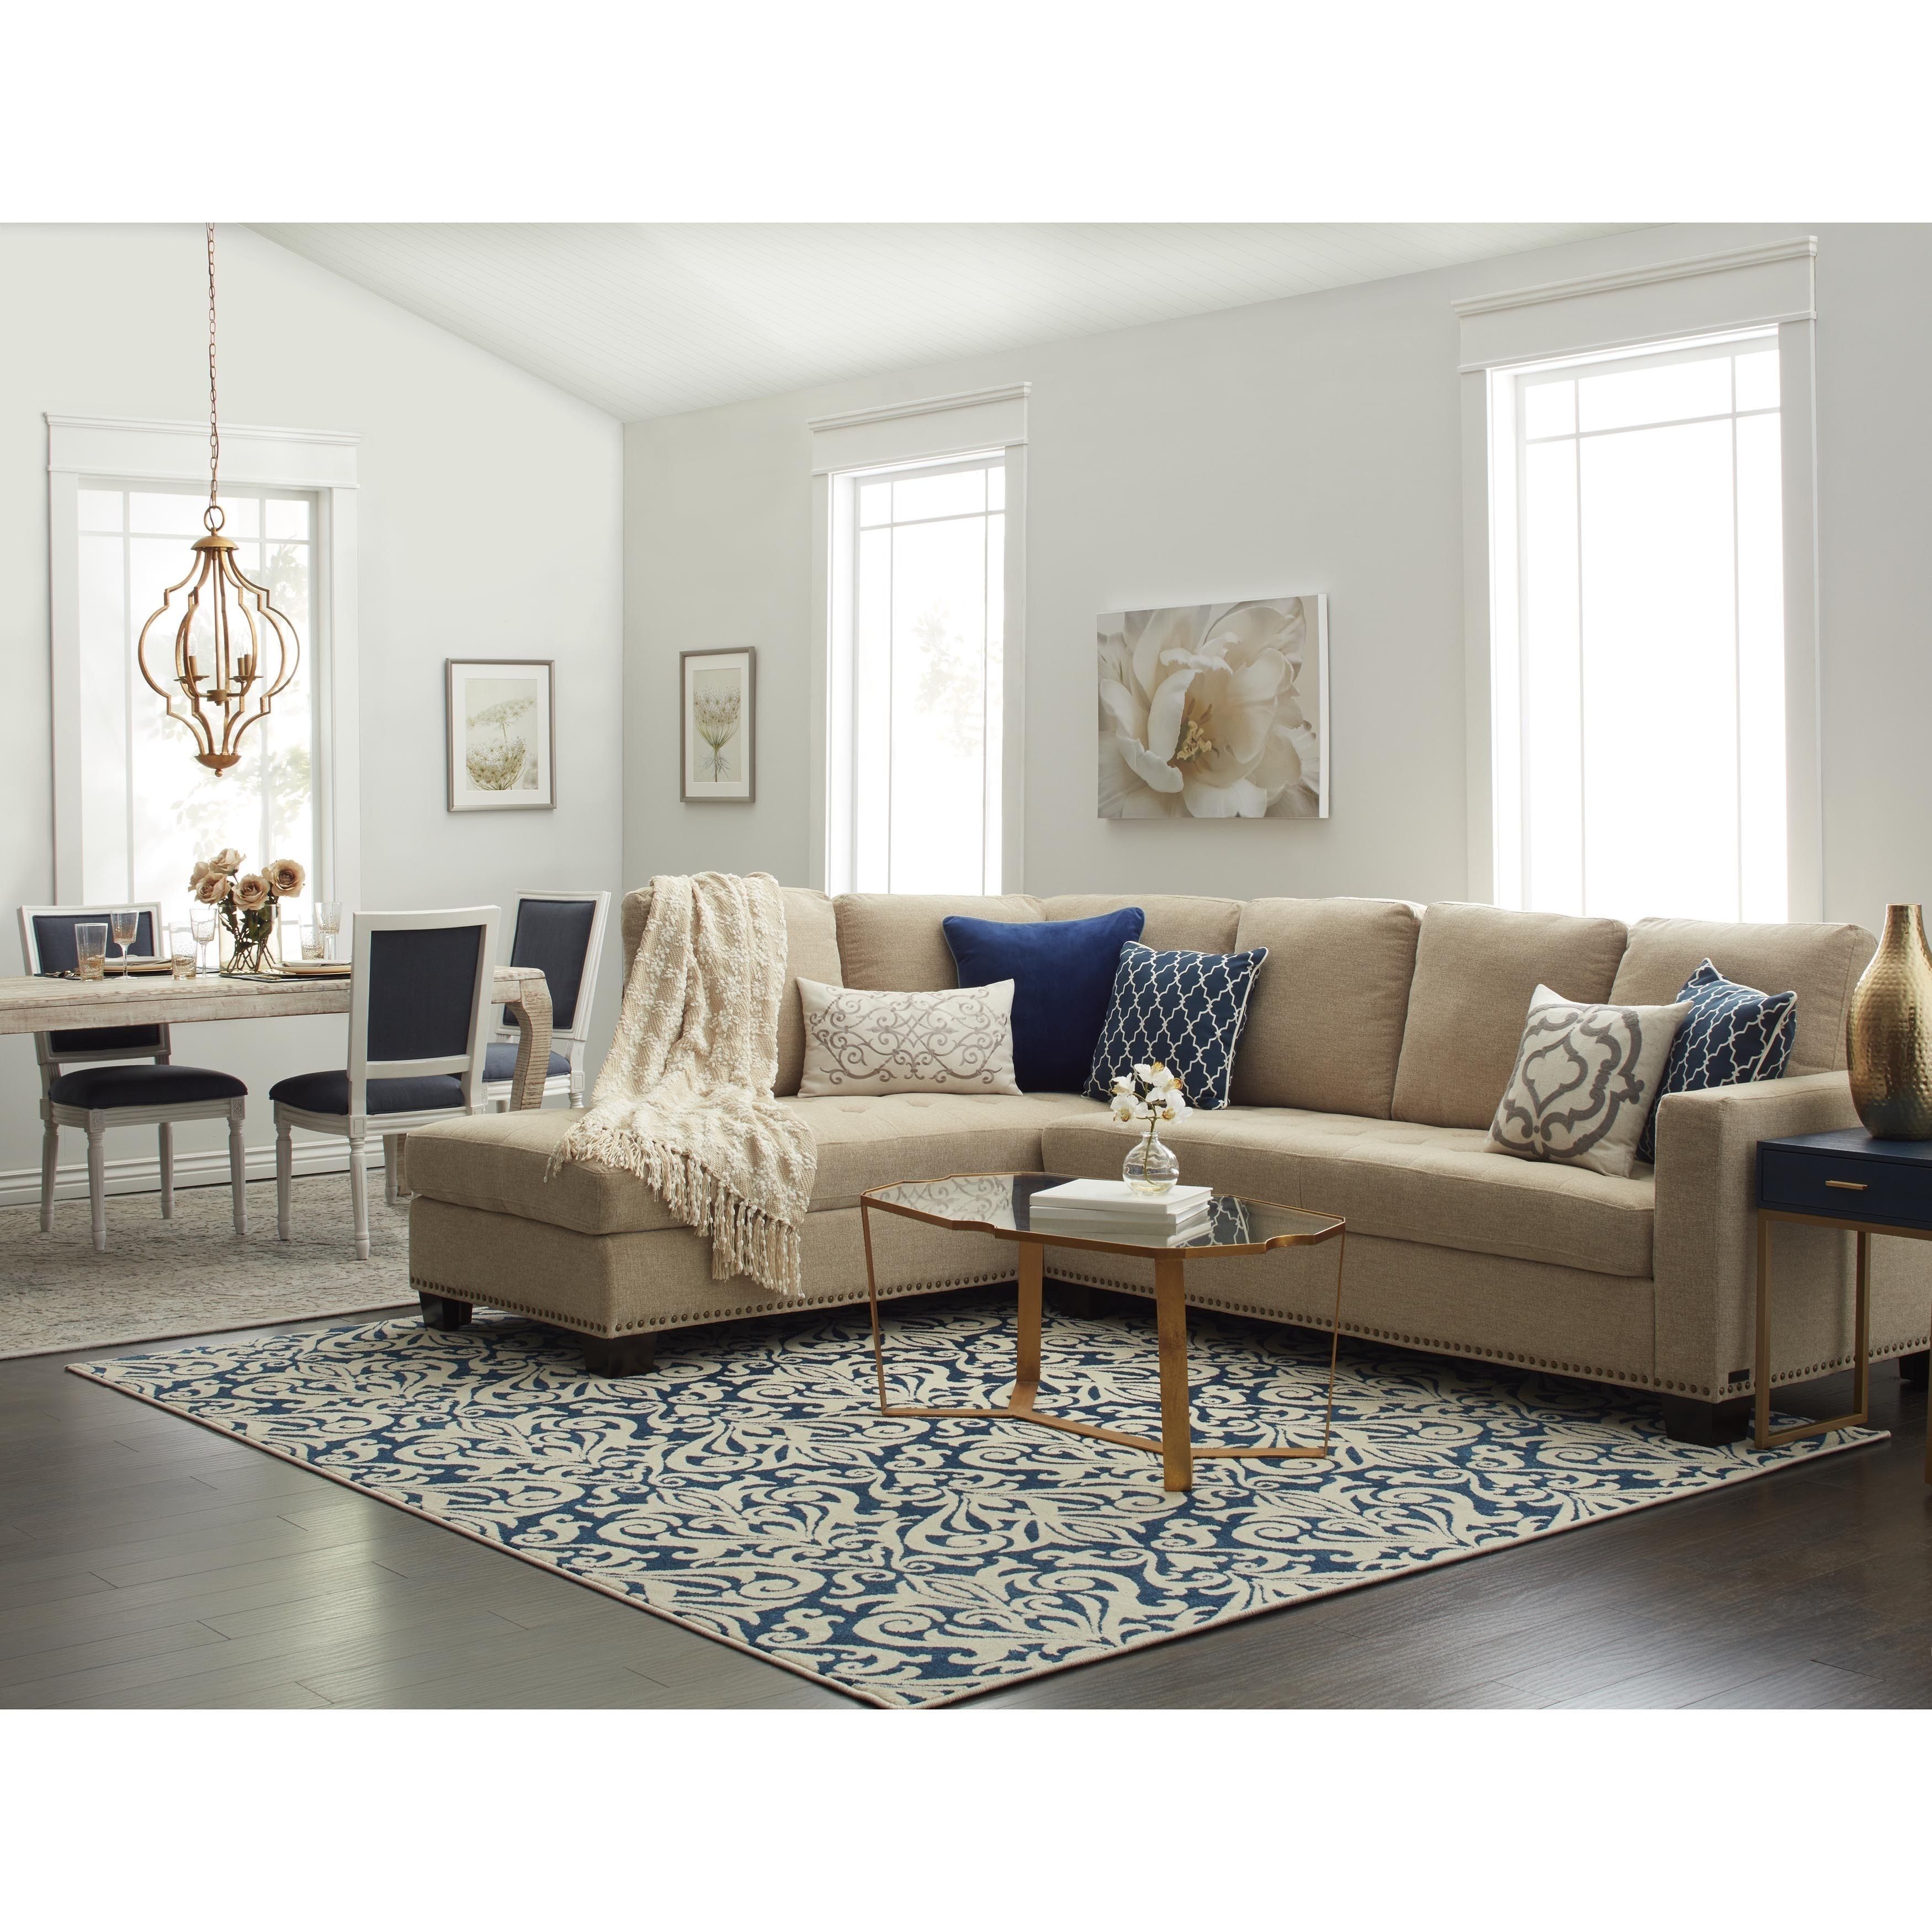 Sectionals Home Goods Free Shipping On Orders Over 45 At For Overstock Sectional Sofas 